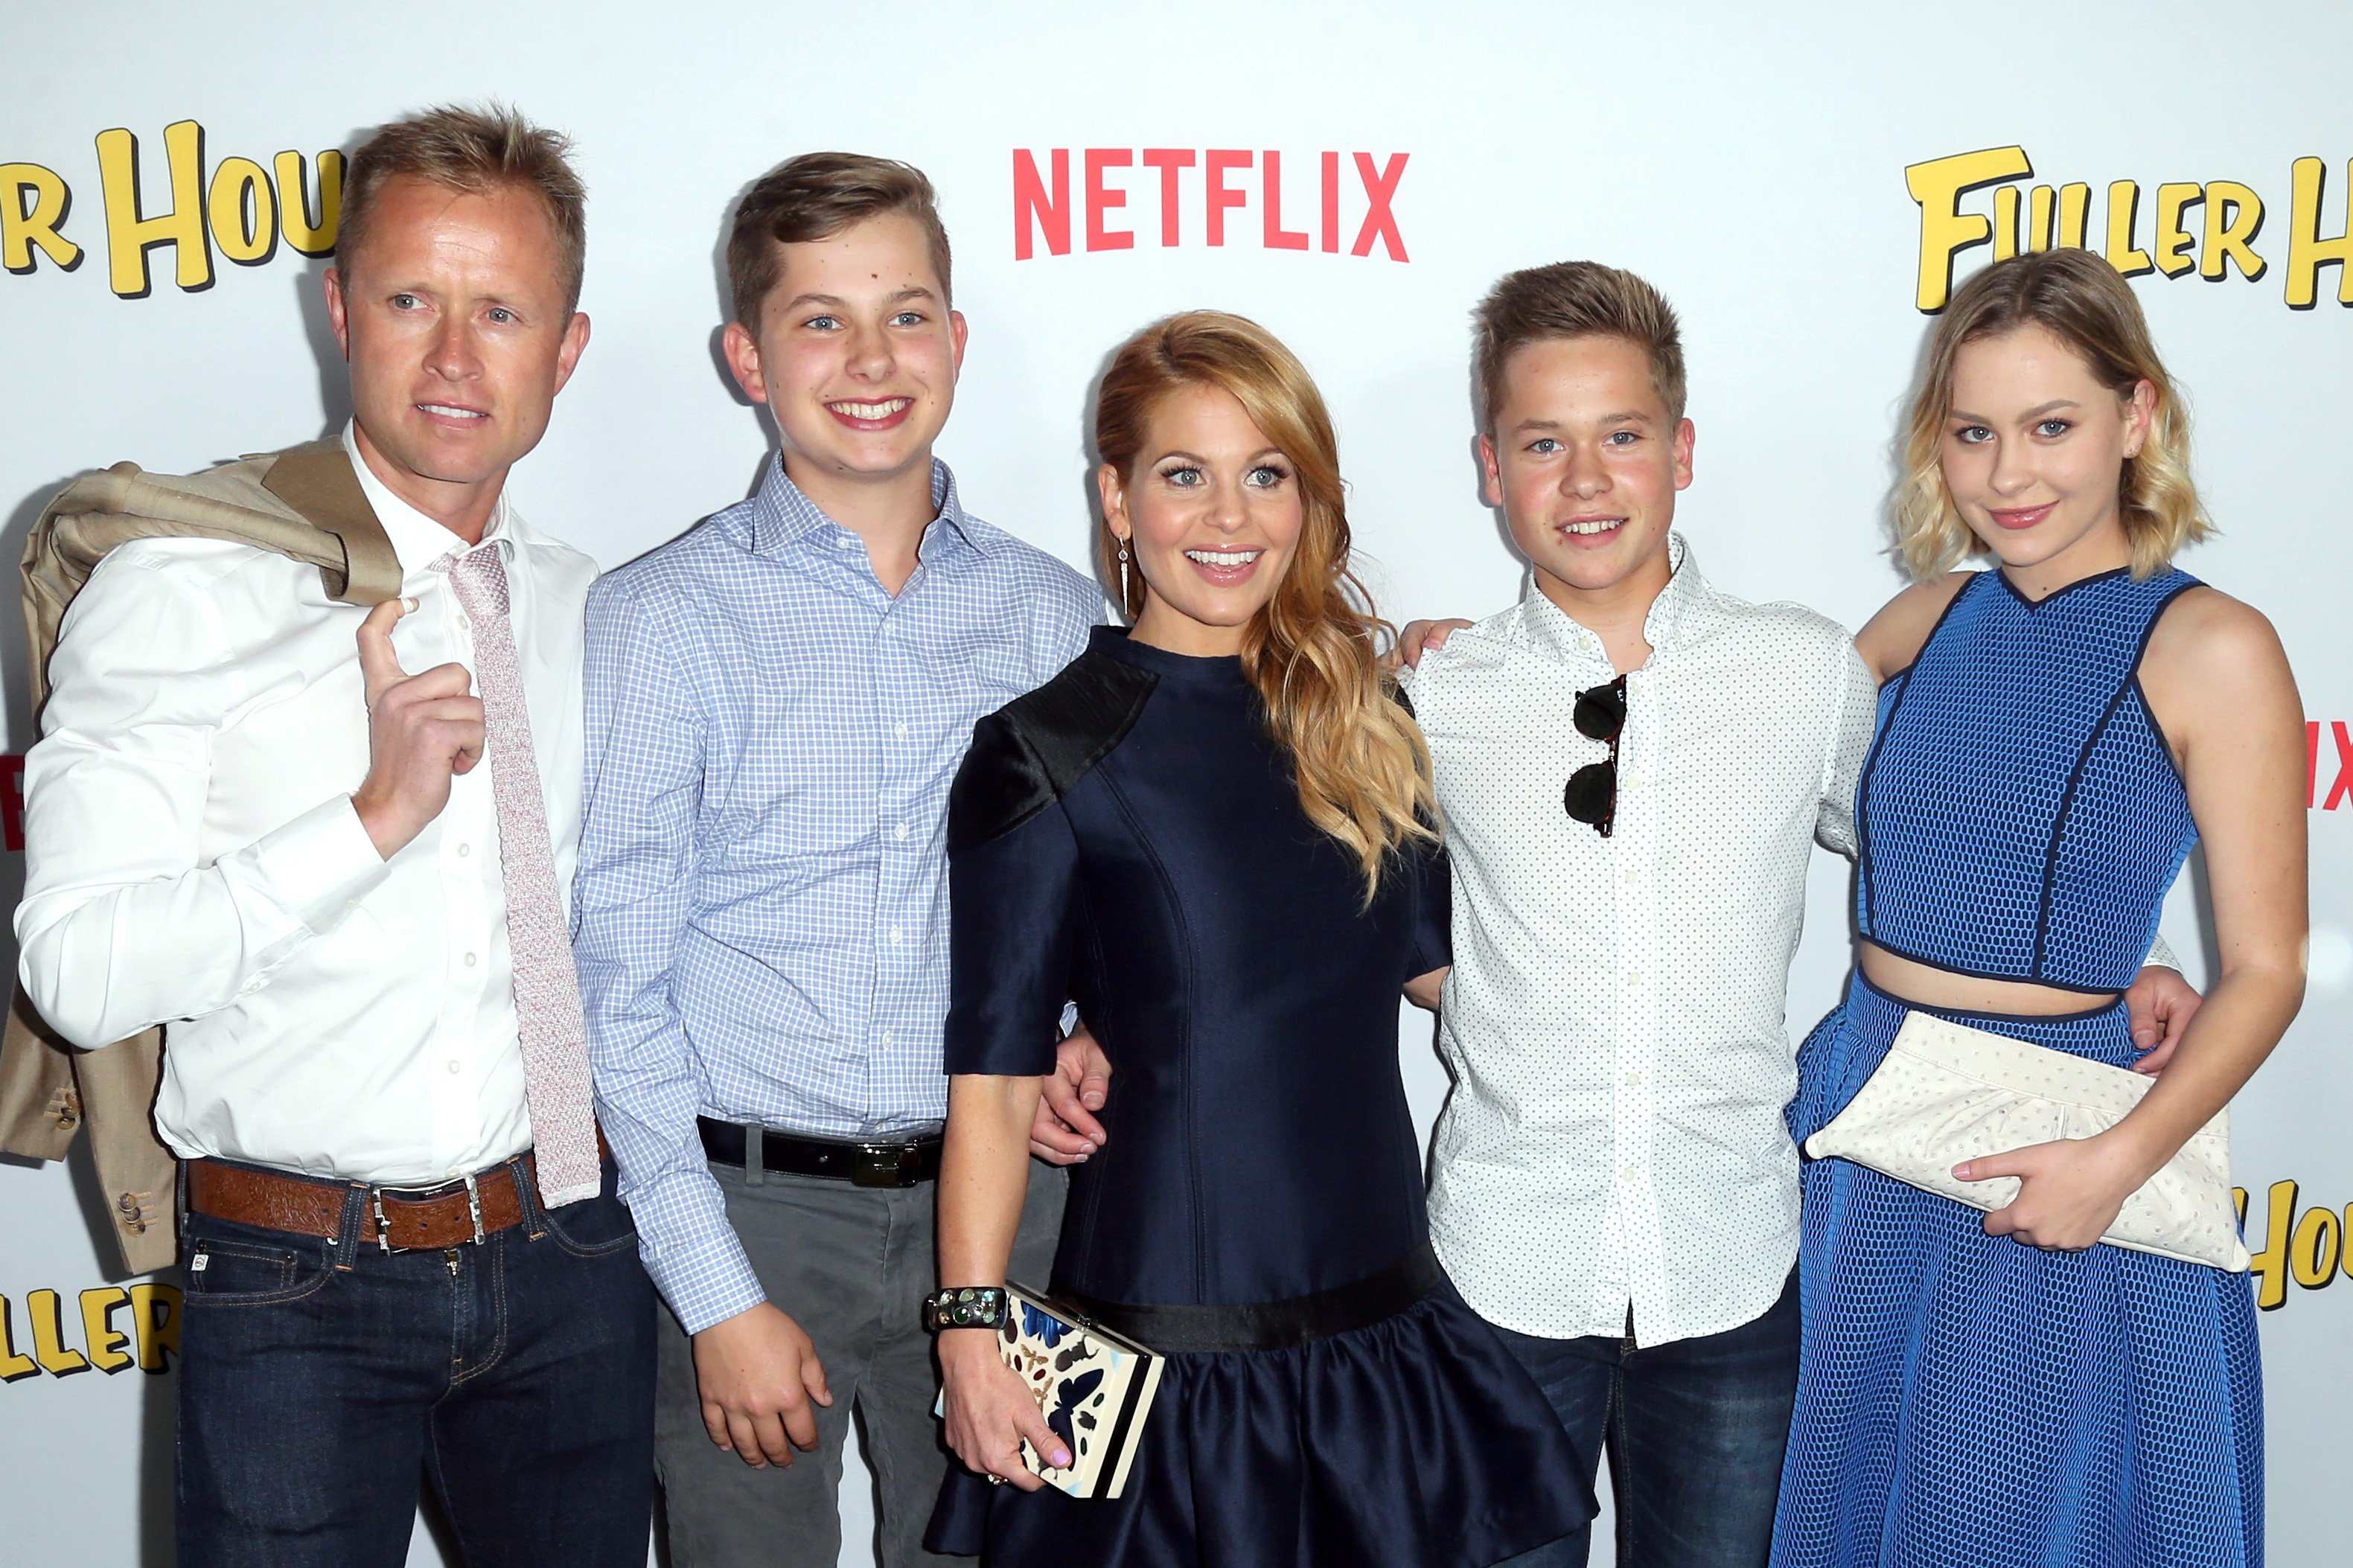 Actress Candace Cameron Bure [Center] with her husband Valerie Bure [Far Left], her sons Lev and Maksim and daughter Natasha. | Source: Getty Images